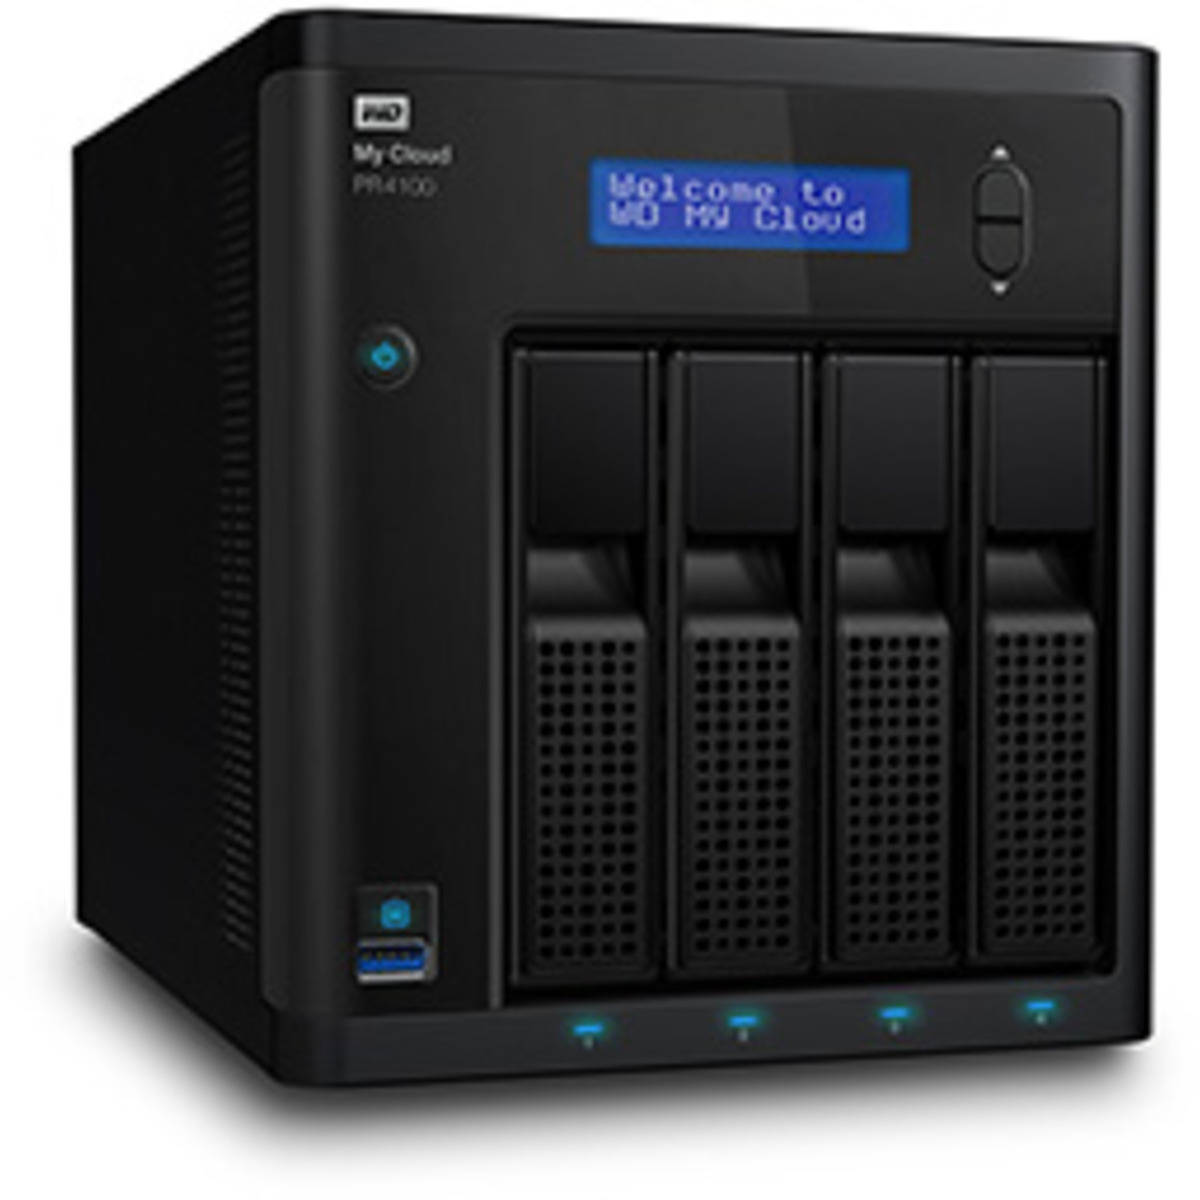 Western Digital My Cloud Pro PR4100 18tb 4-Bay Desktop Multimedia / Power User / Business NAS - Network Attached Storage Device 3x6tb Western Digital Red WD60EFAX 3.5 5400rpm SATA 6Gb/s HDD NAS Class Drives Installed - Burn-In Tested My Cloud Pro PR4100